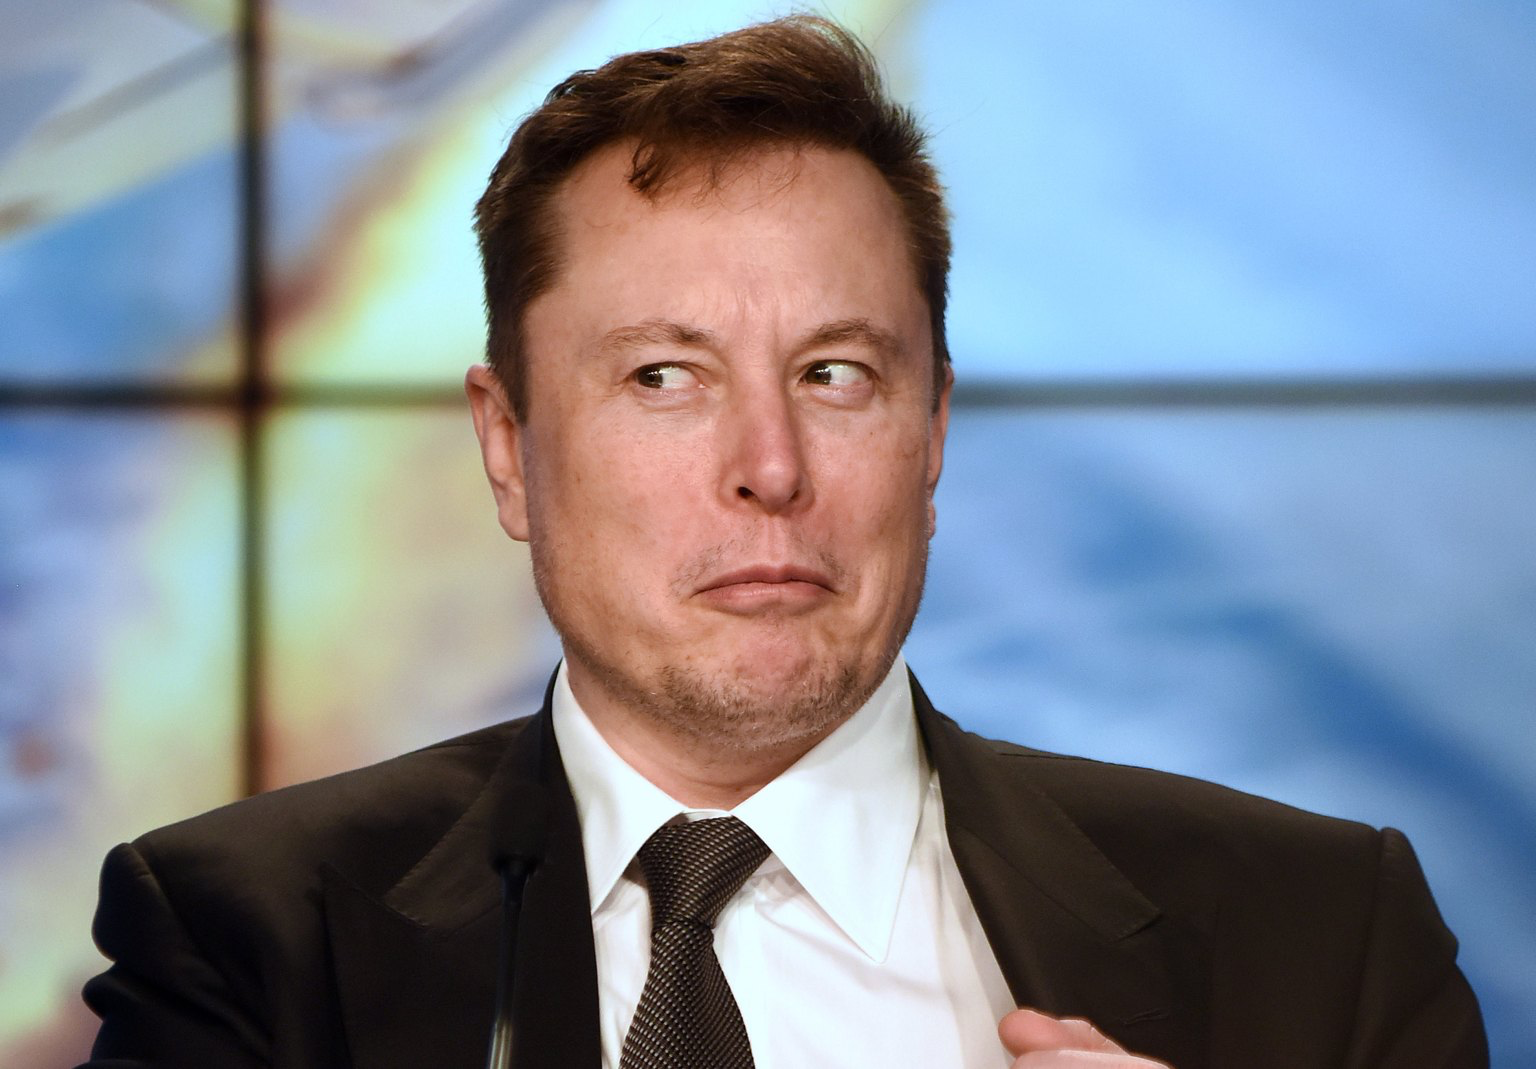 tesla stock is there a forming of a new bubble